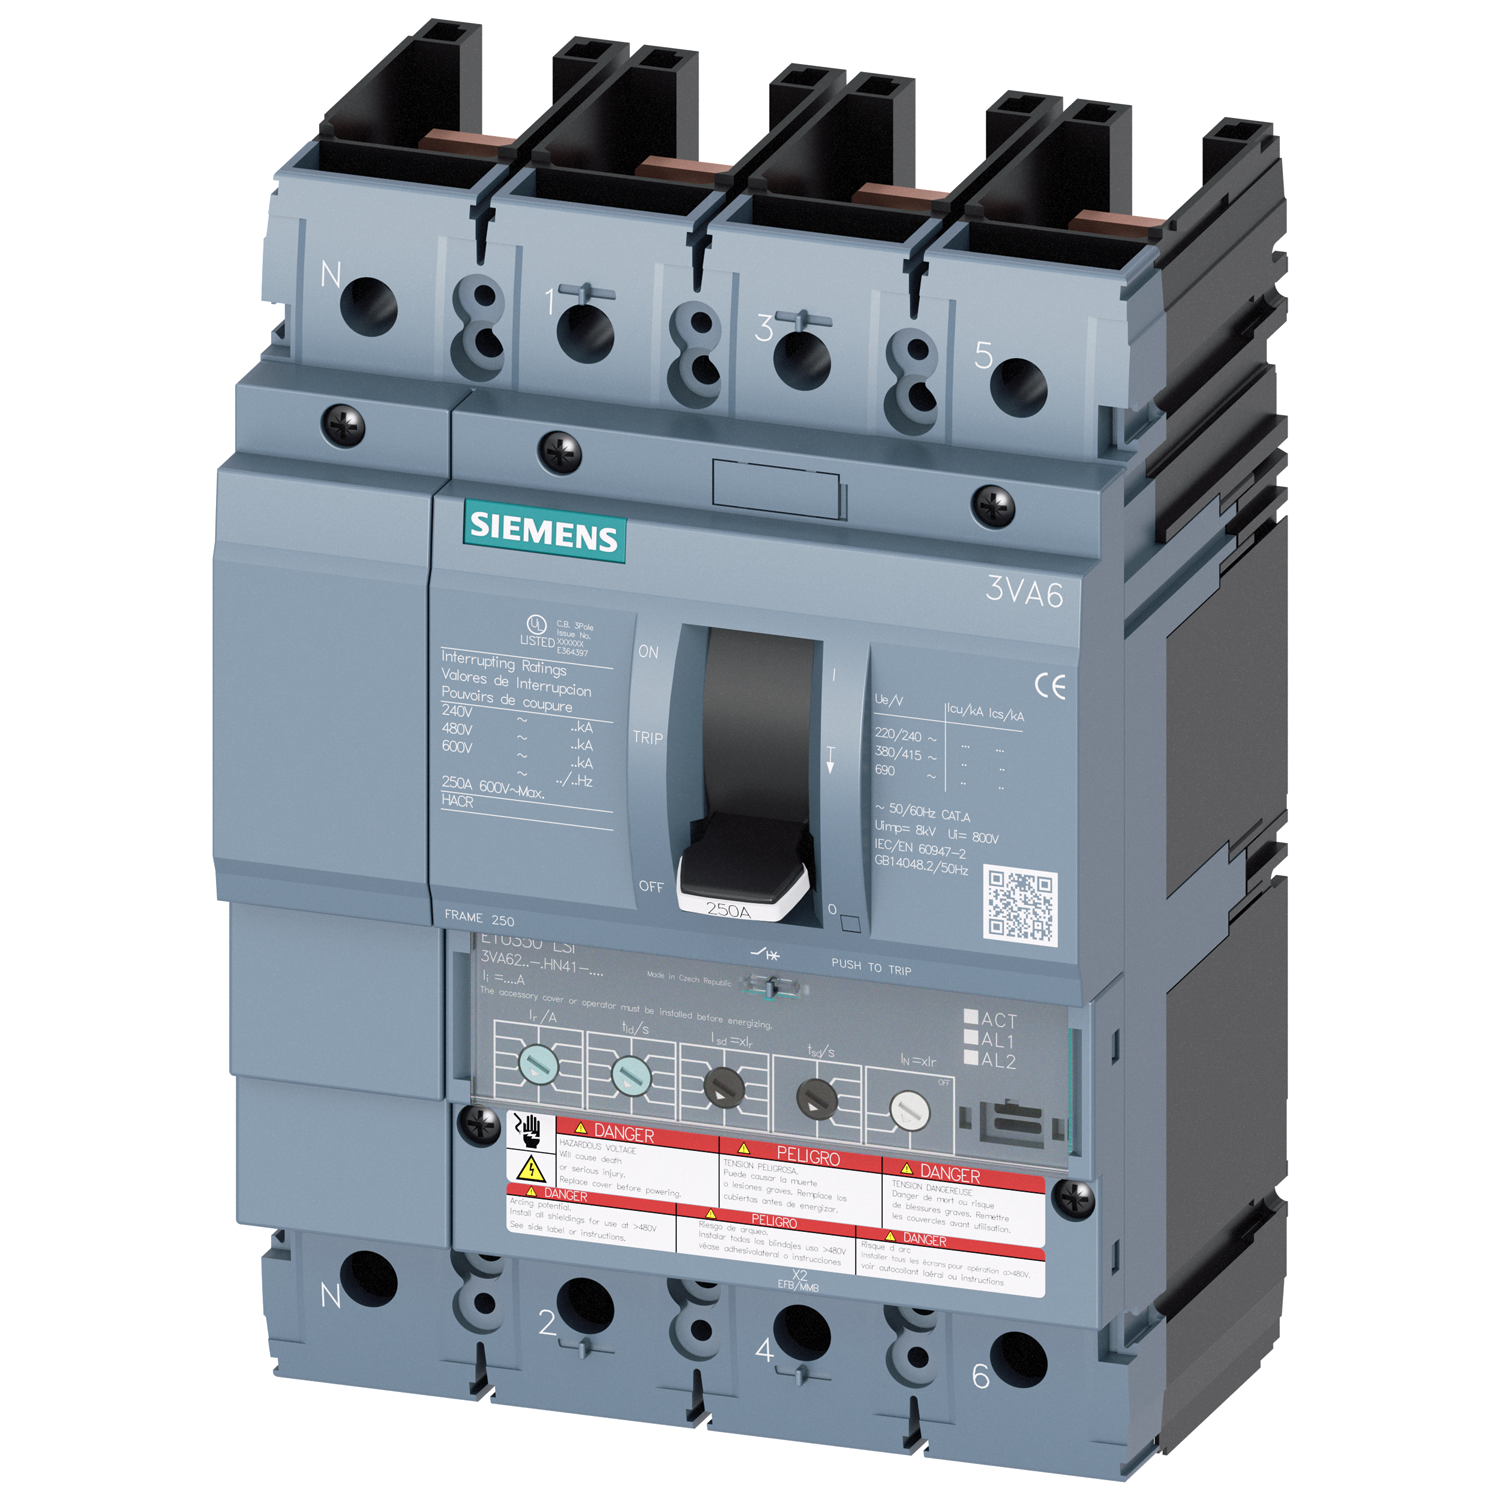 SIEMENS LOW VOLTAGE 3VA UL MOLDED CASE CIRCUIT BREAKER WITH ELECTRONIC TRIP UNIT. 3VA62 FRAME WITH HIGH (CLASS L) BREAKING CAPACITY. 250A 4-POLE (50KAIC AT 600V) (150KAIC AT 480V). ETU350 TRIP UNIT LSI. SPECIAL FEATURES WITHOUT LUGS.. DIMENSIONS (W x H x D) IN 5.5 x 7.8 x 4.2.